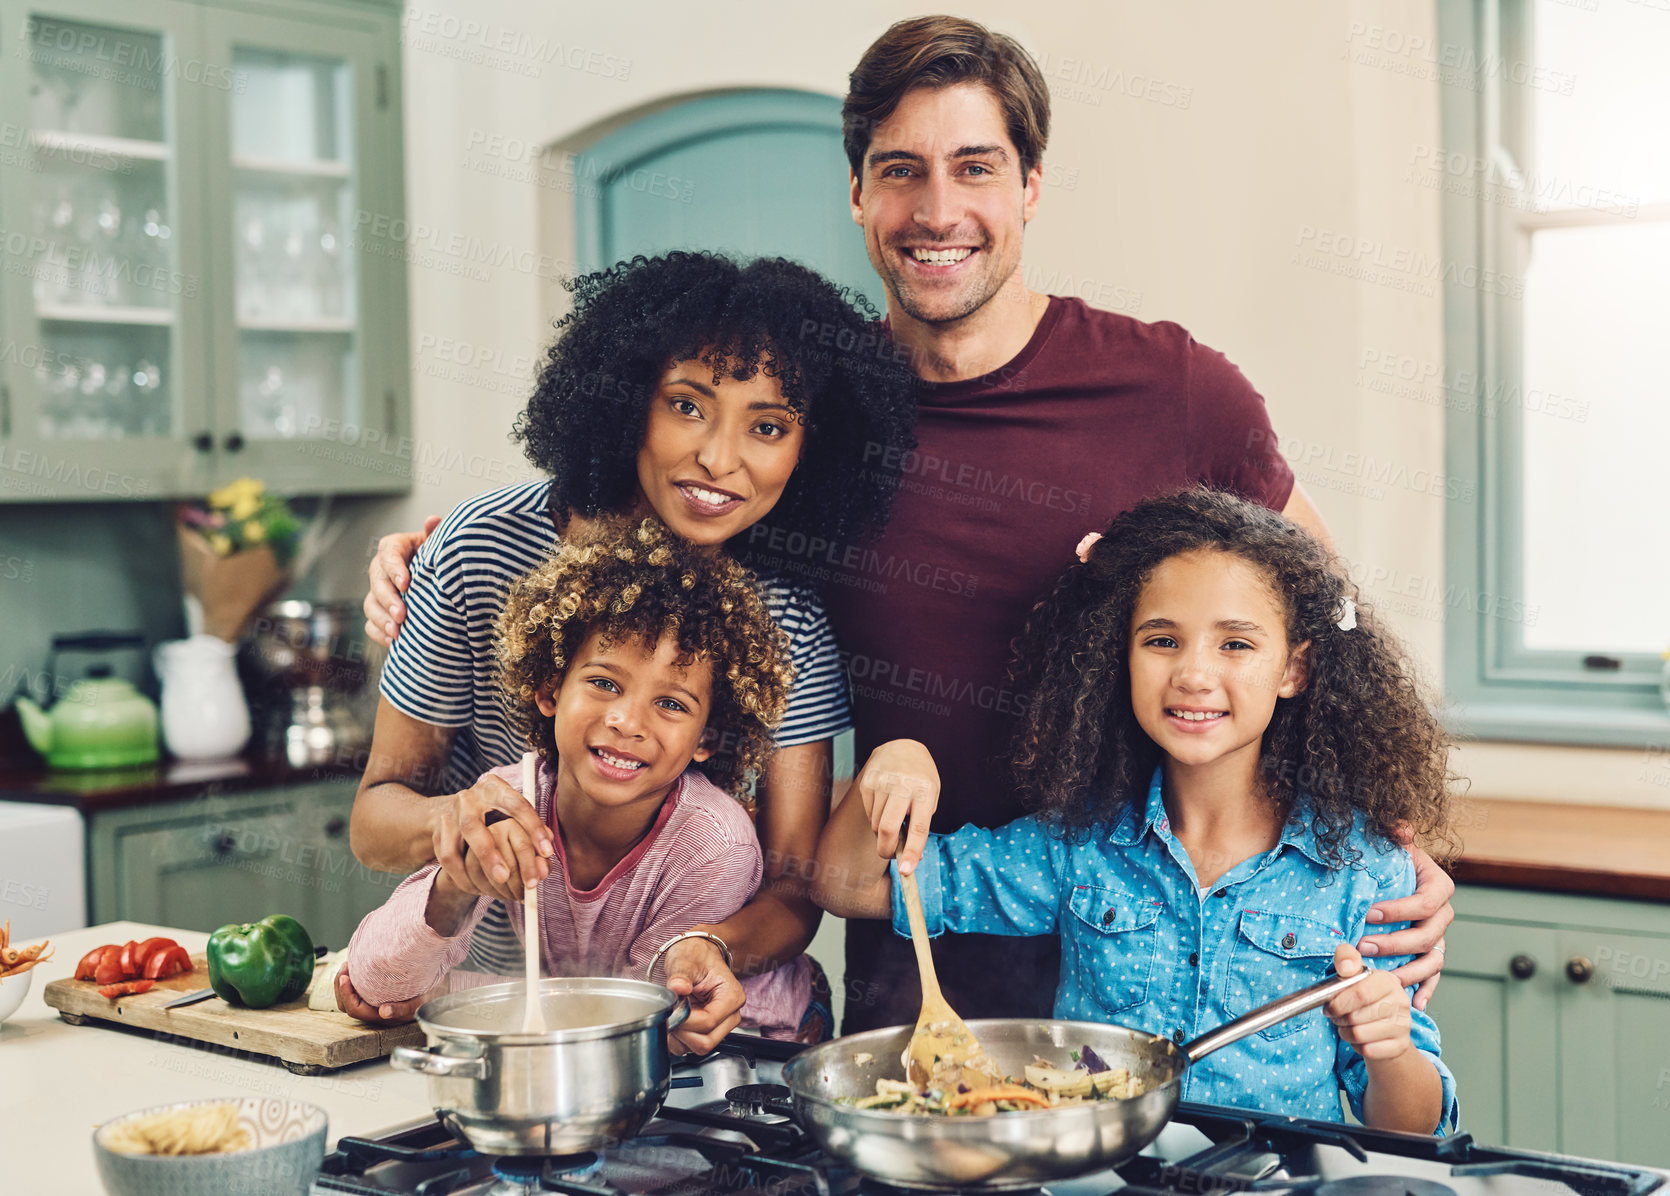 Buy stock photo Shot of a family of four cooking together in their kitchen at home